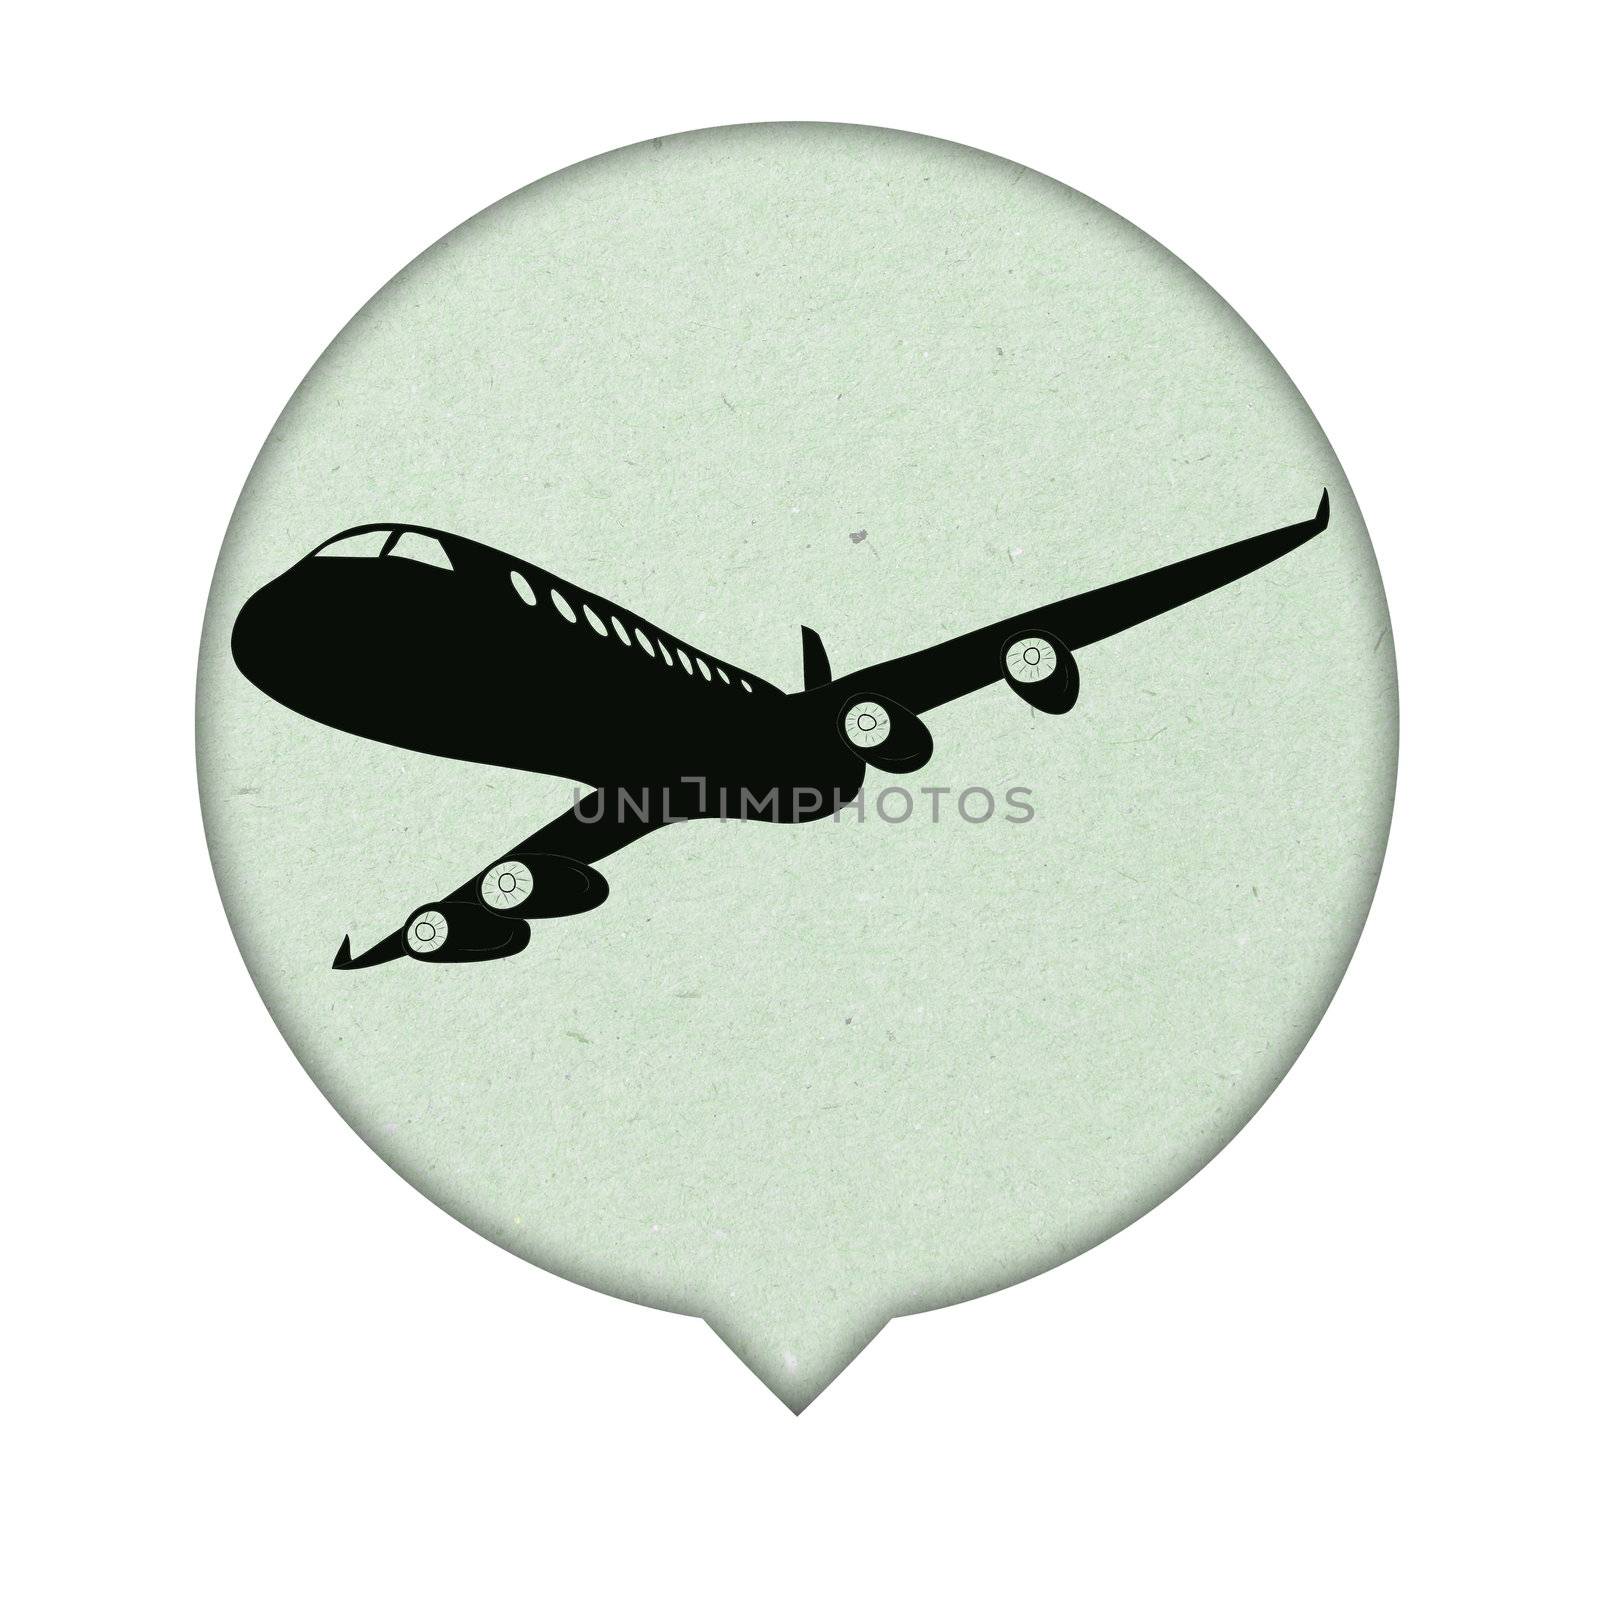 Airplane Sign icon on paper  background